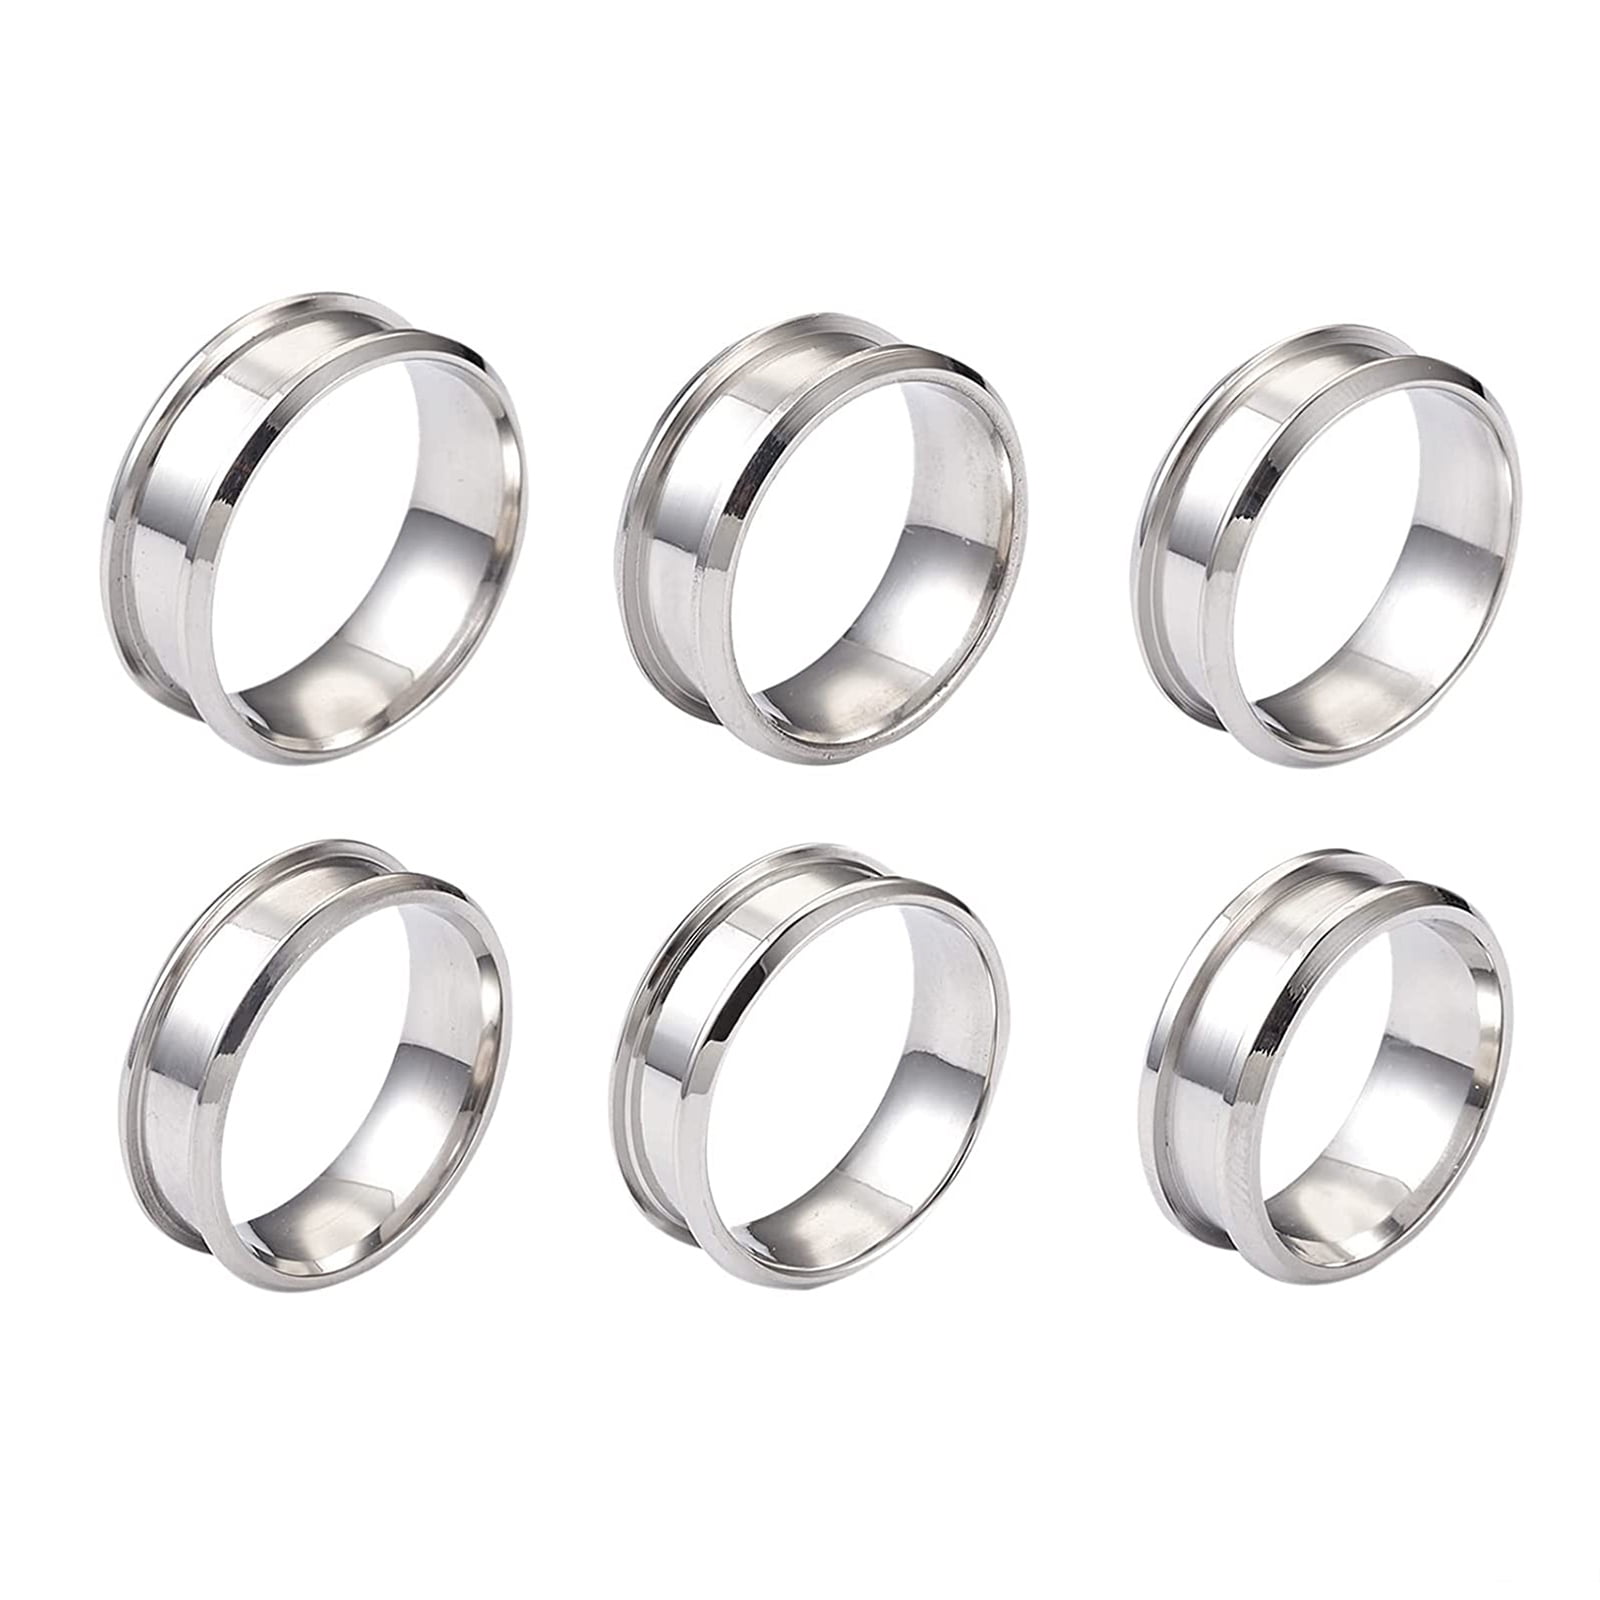 Invisible Ring Sizers, Loose Wedding Band Guards Adjuster Inserts for Men &  Women, Fitter Engagement Rings Clear Insert Silicone Tightener, Silver Gold  Metal Jewelry Plastic Sizer, Mens Womens Wide Size Bands Adjusters